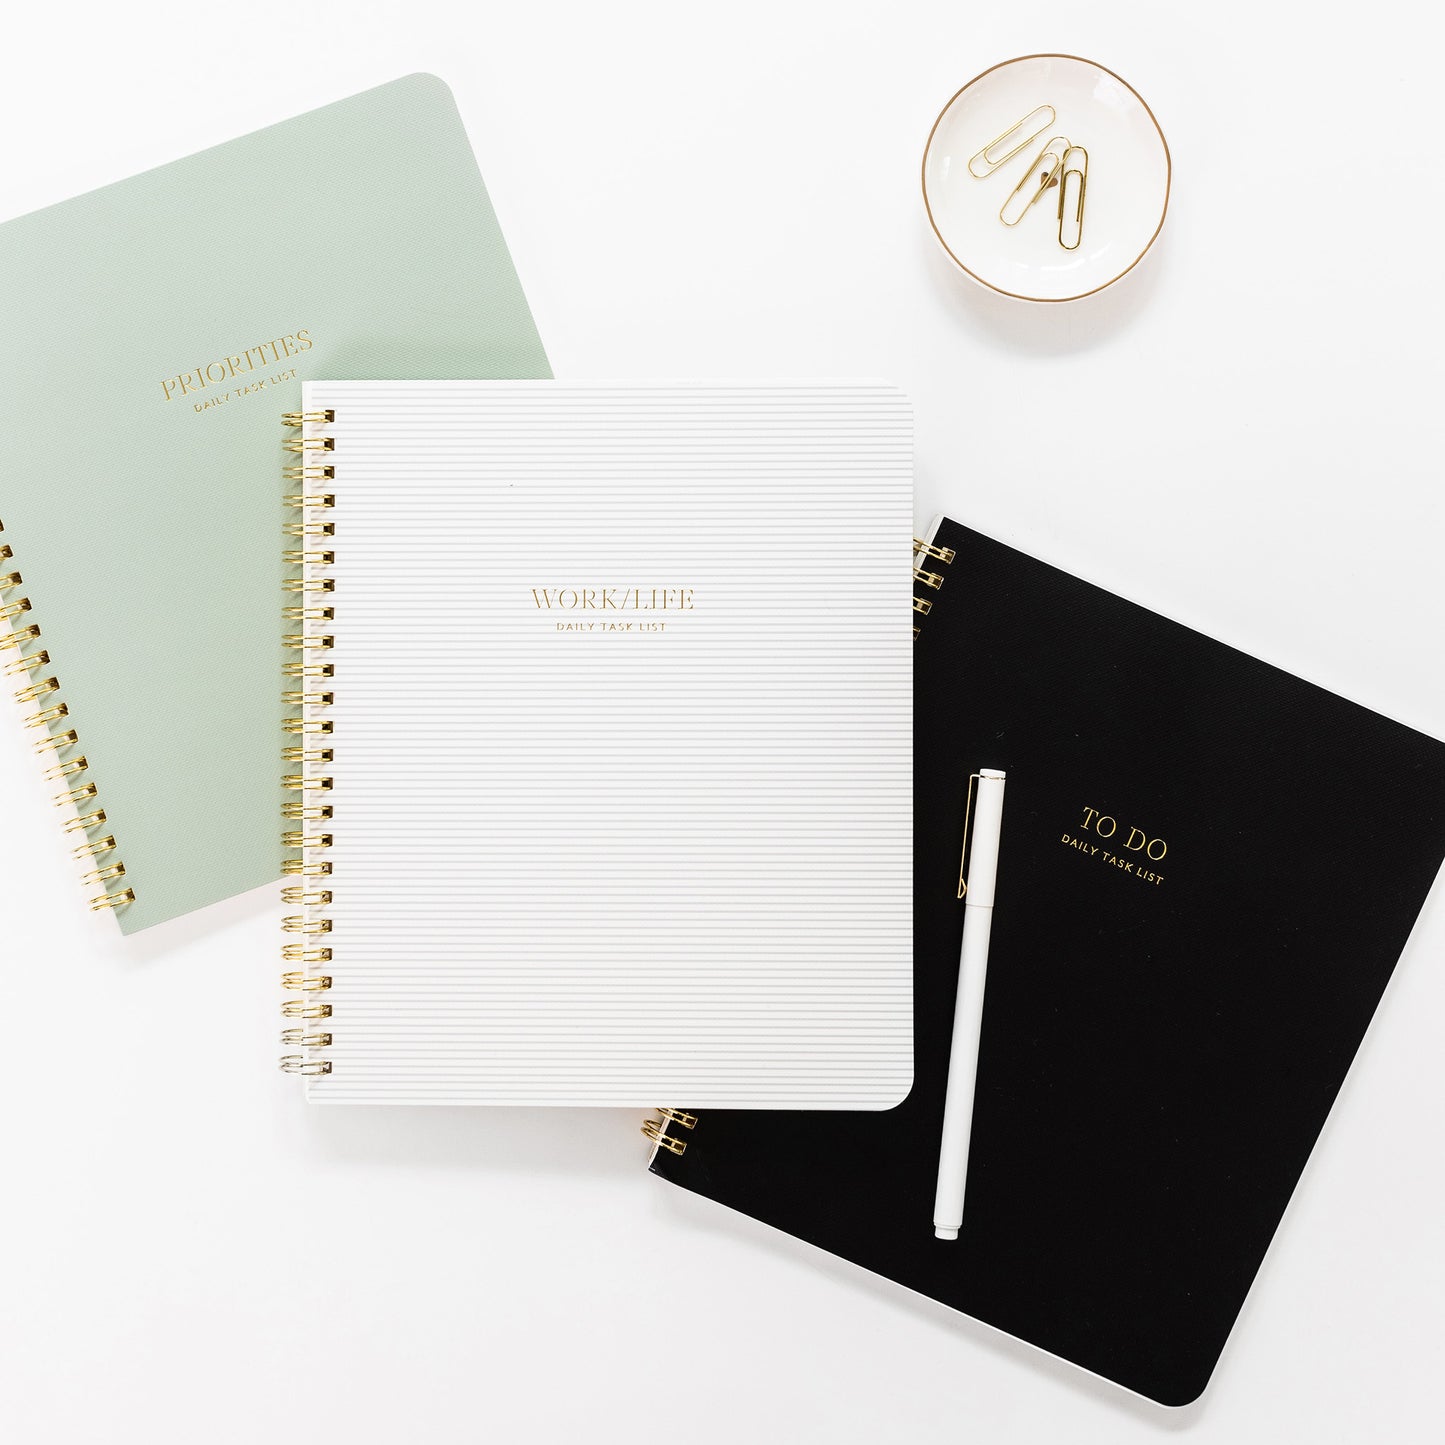 Guided Spiral Notebooks in three colors